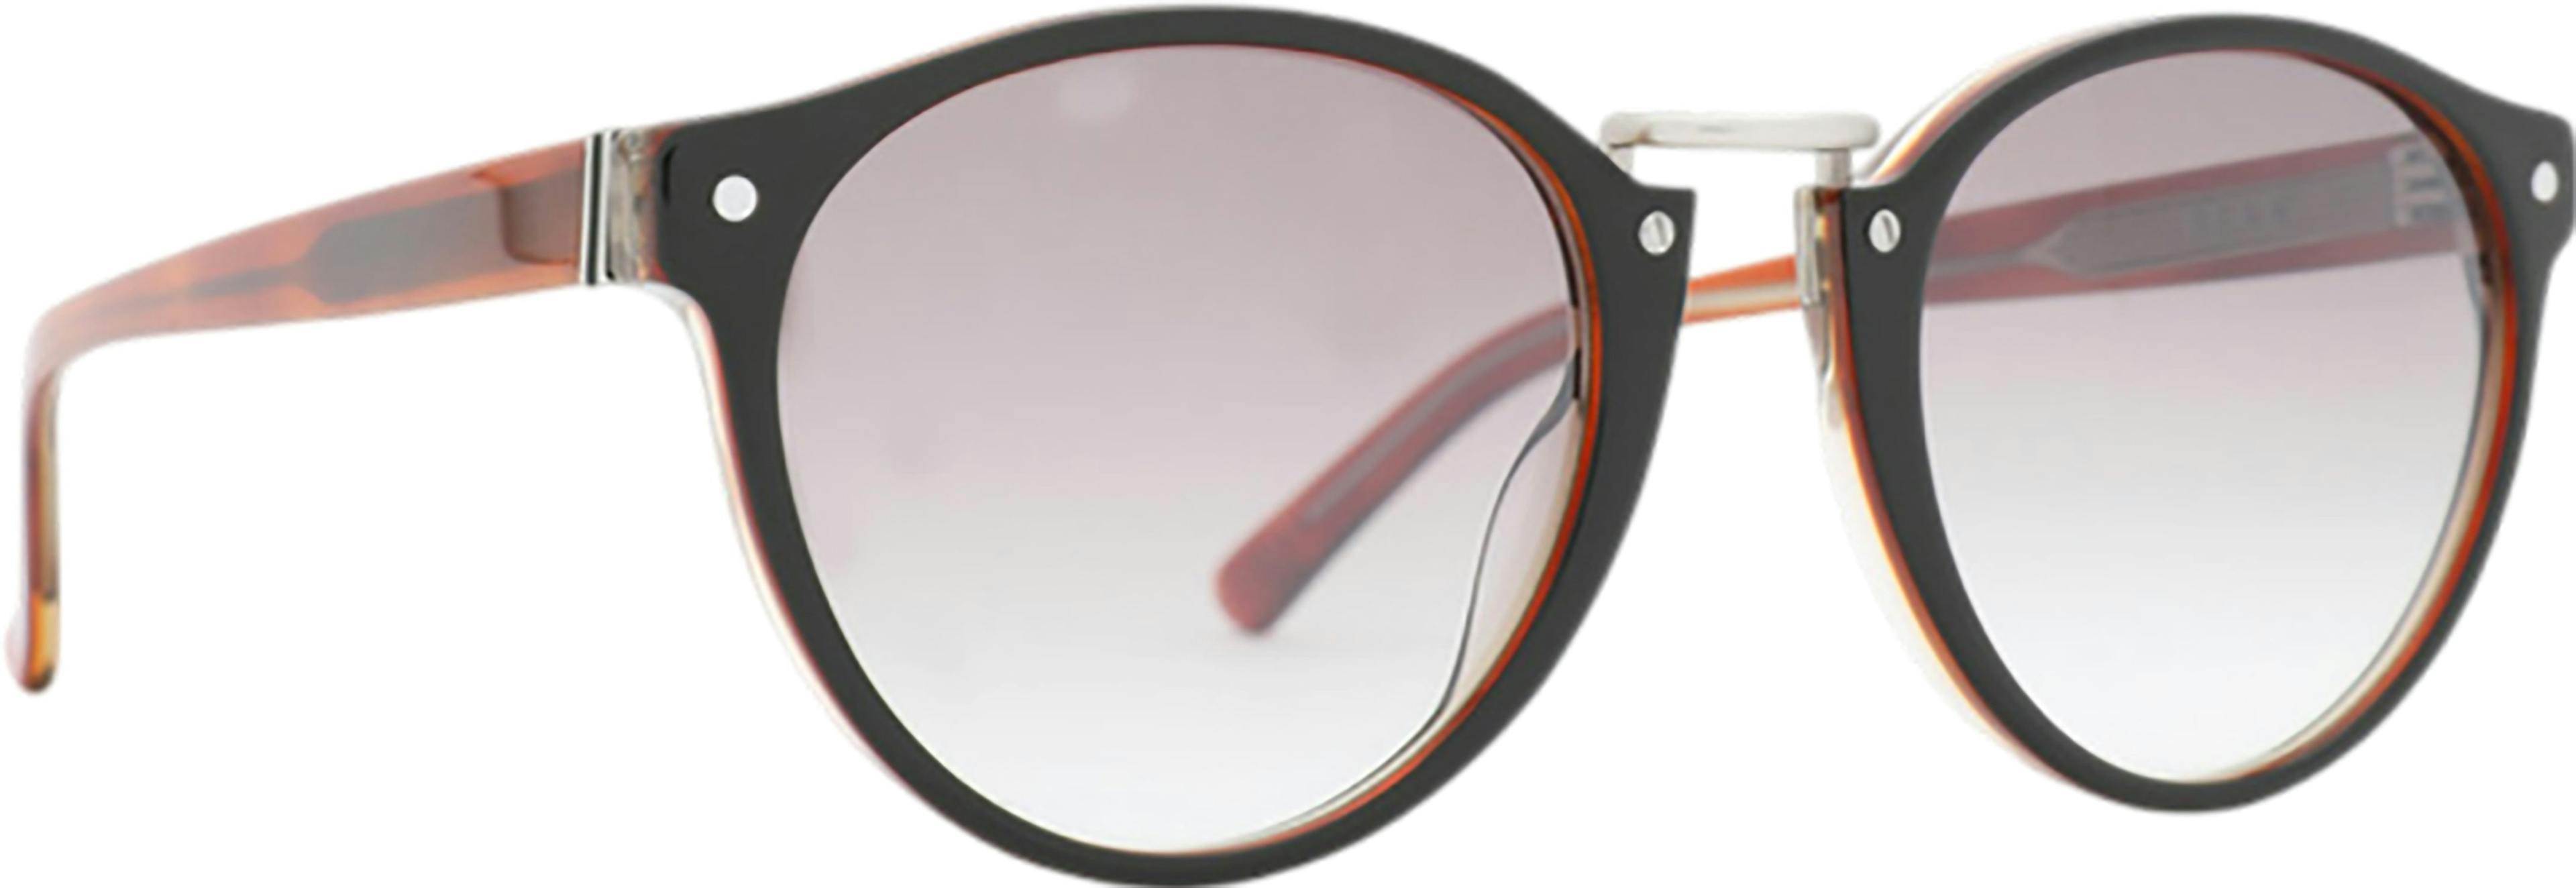 Product image for Stax Sunglasses - Unisex